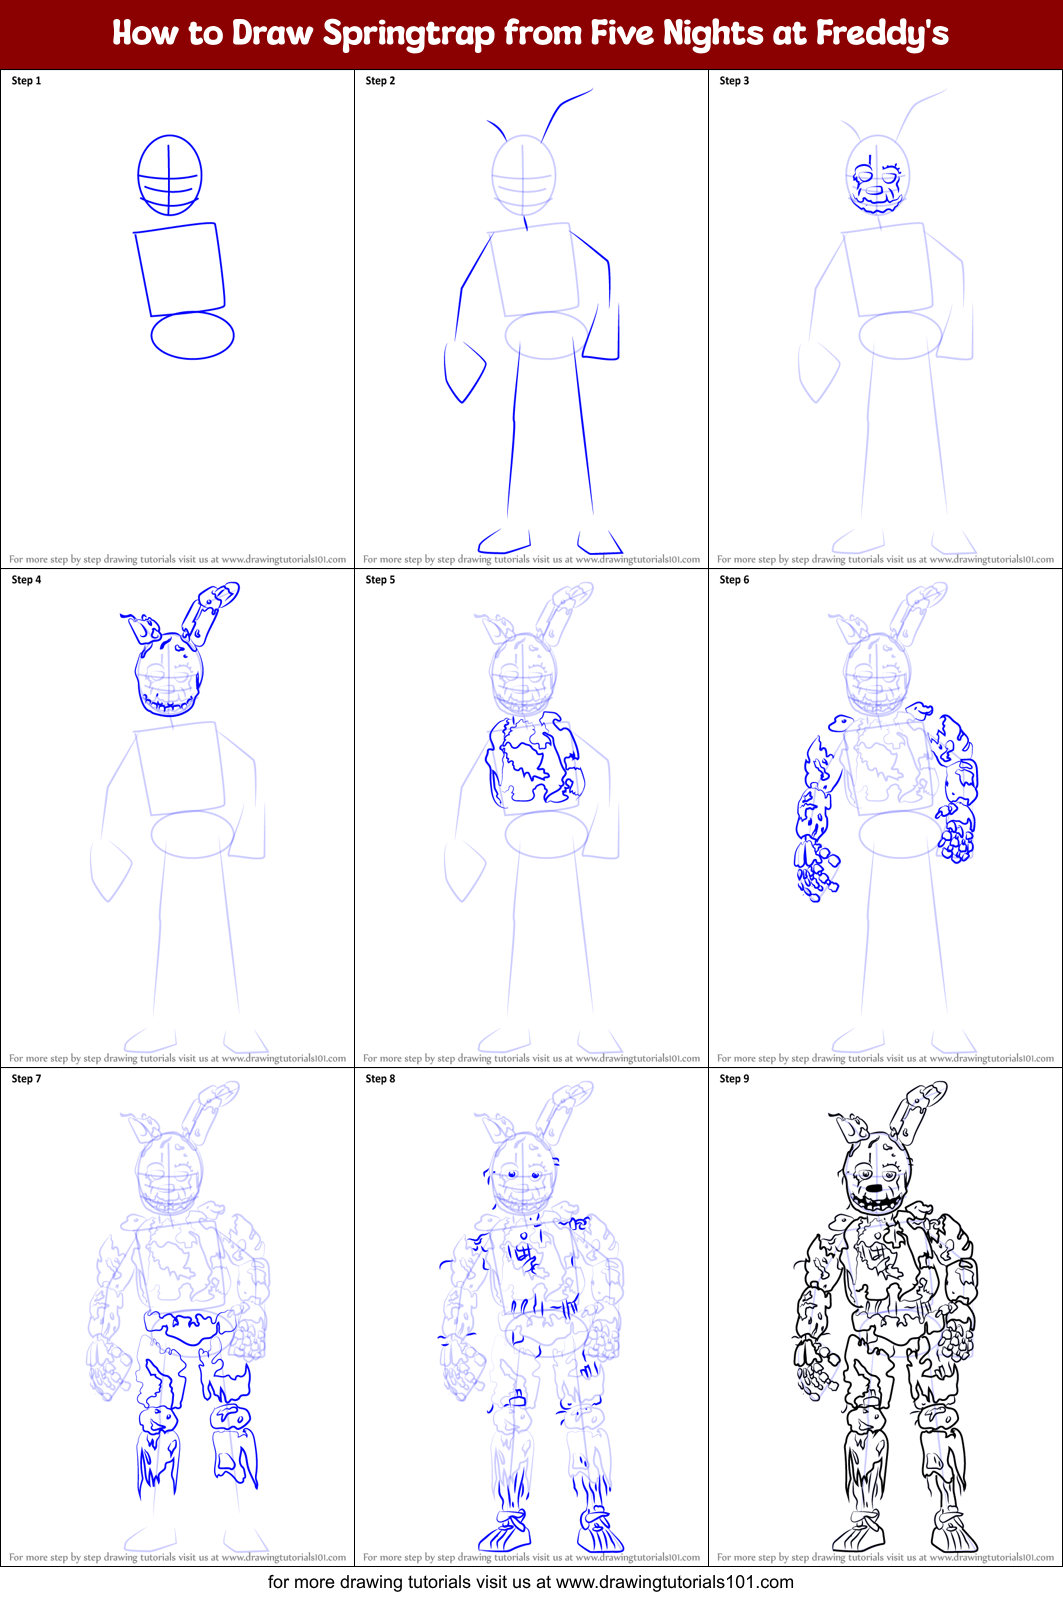 How To Draw Springtrap From Five Nights At Freddys 3